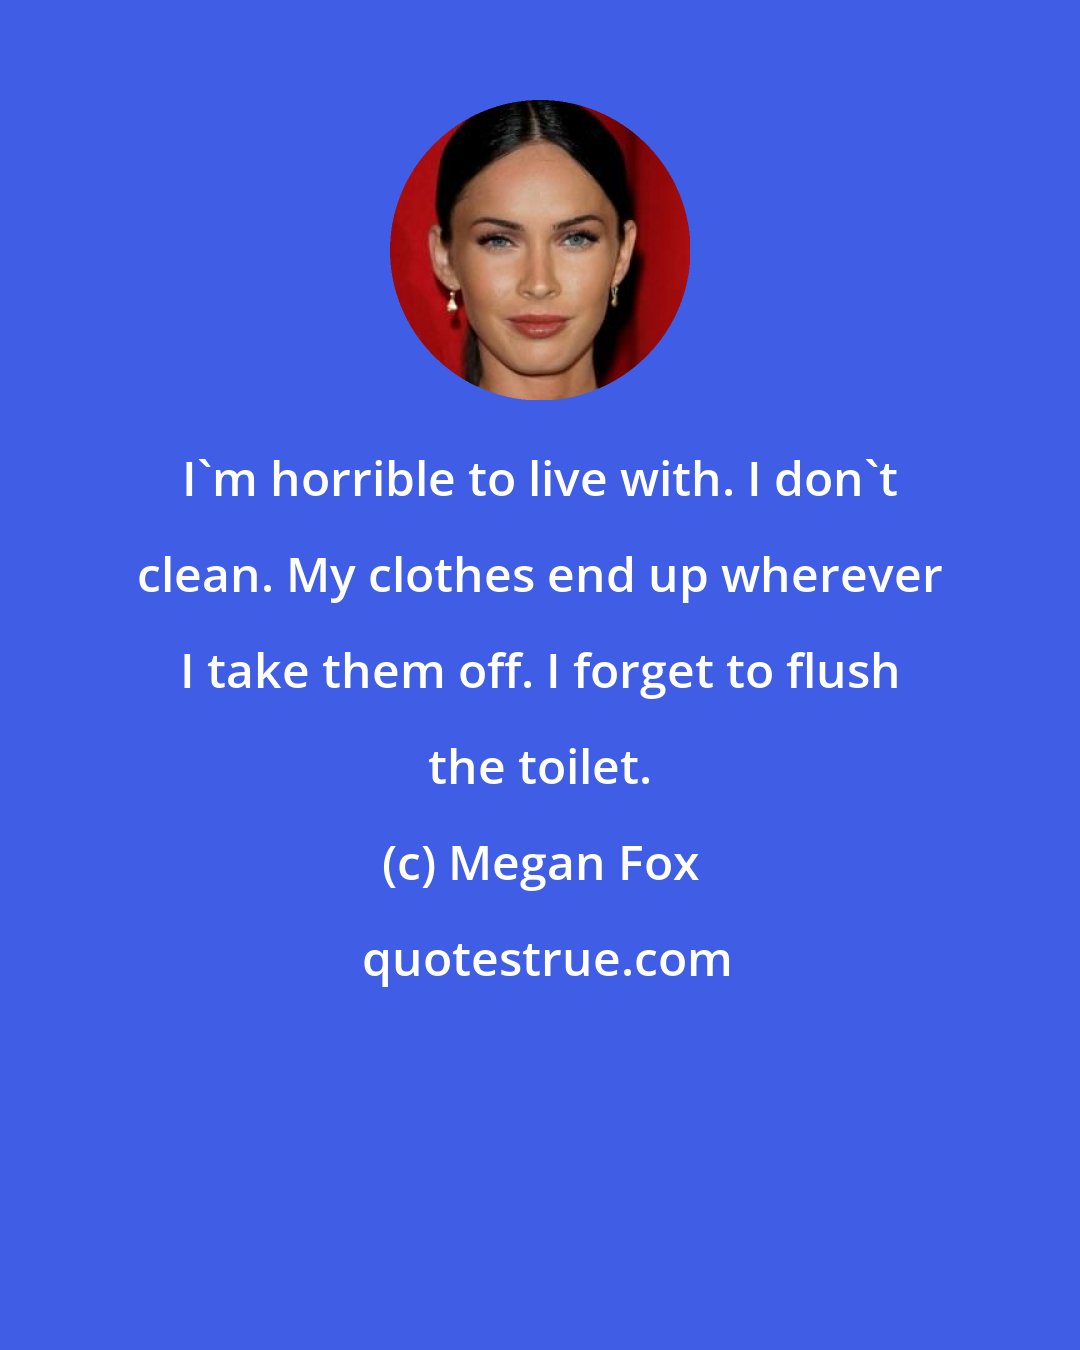 Megan Fox: I'm horrible to live with. I don't clean. My clothes end up wherever I take them off. I forget to flush the toilet.